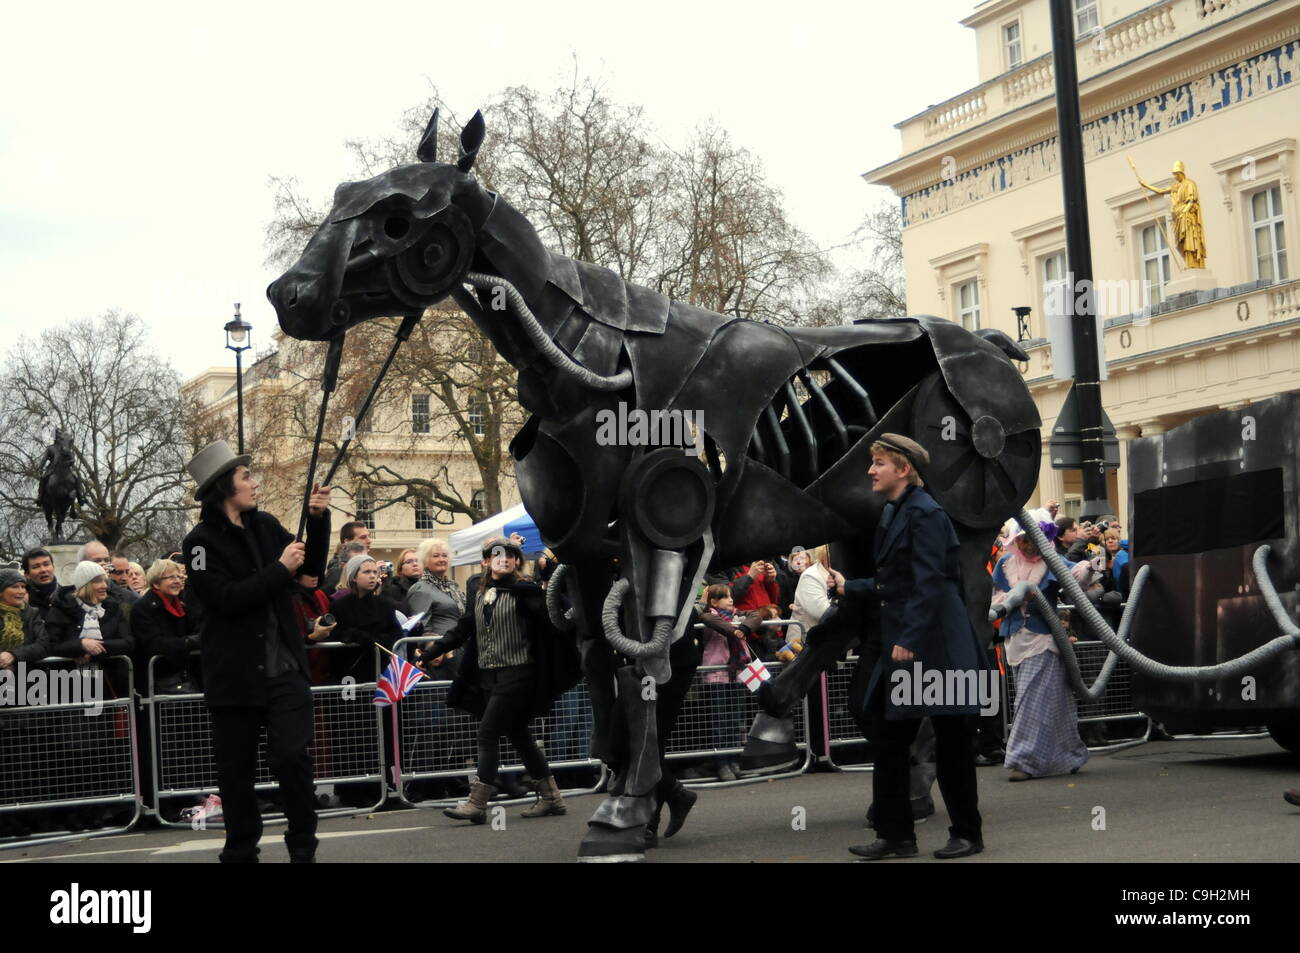 Giant Horse puppet marching during London's New Year's Day Parade. 01/01/12 Stock Photo